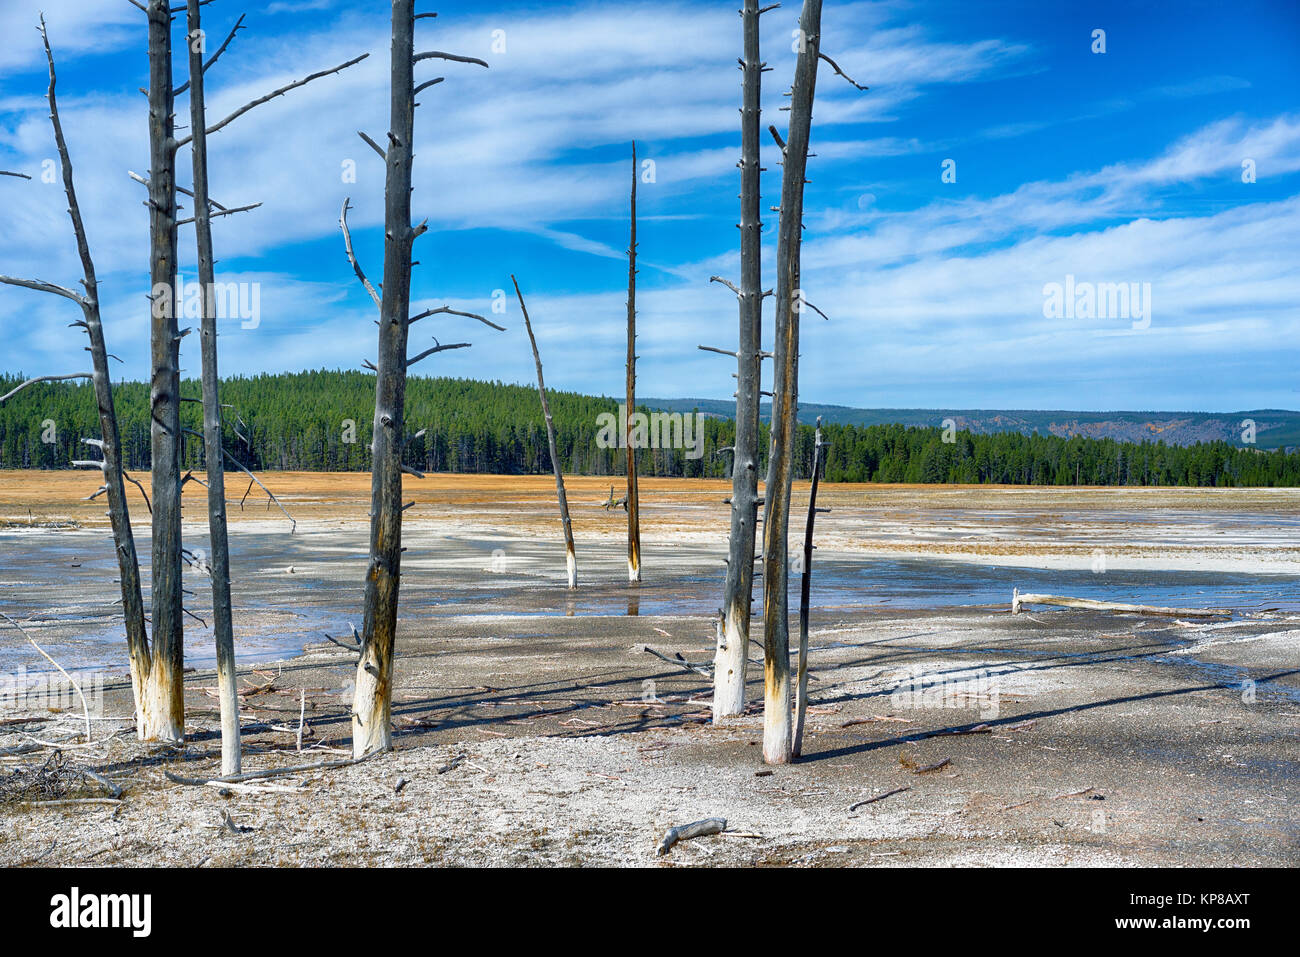 Dead Fir trees in the Yellowstone thermal area, Upper Geyser Basin. Yellowstone National Park, Wyoming, USA Stock Photo